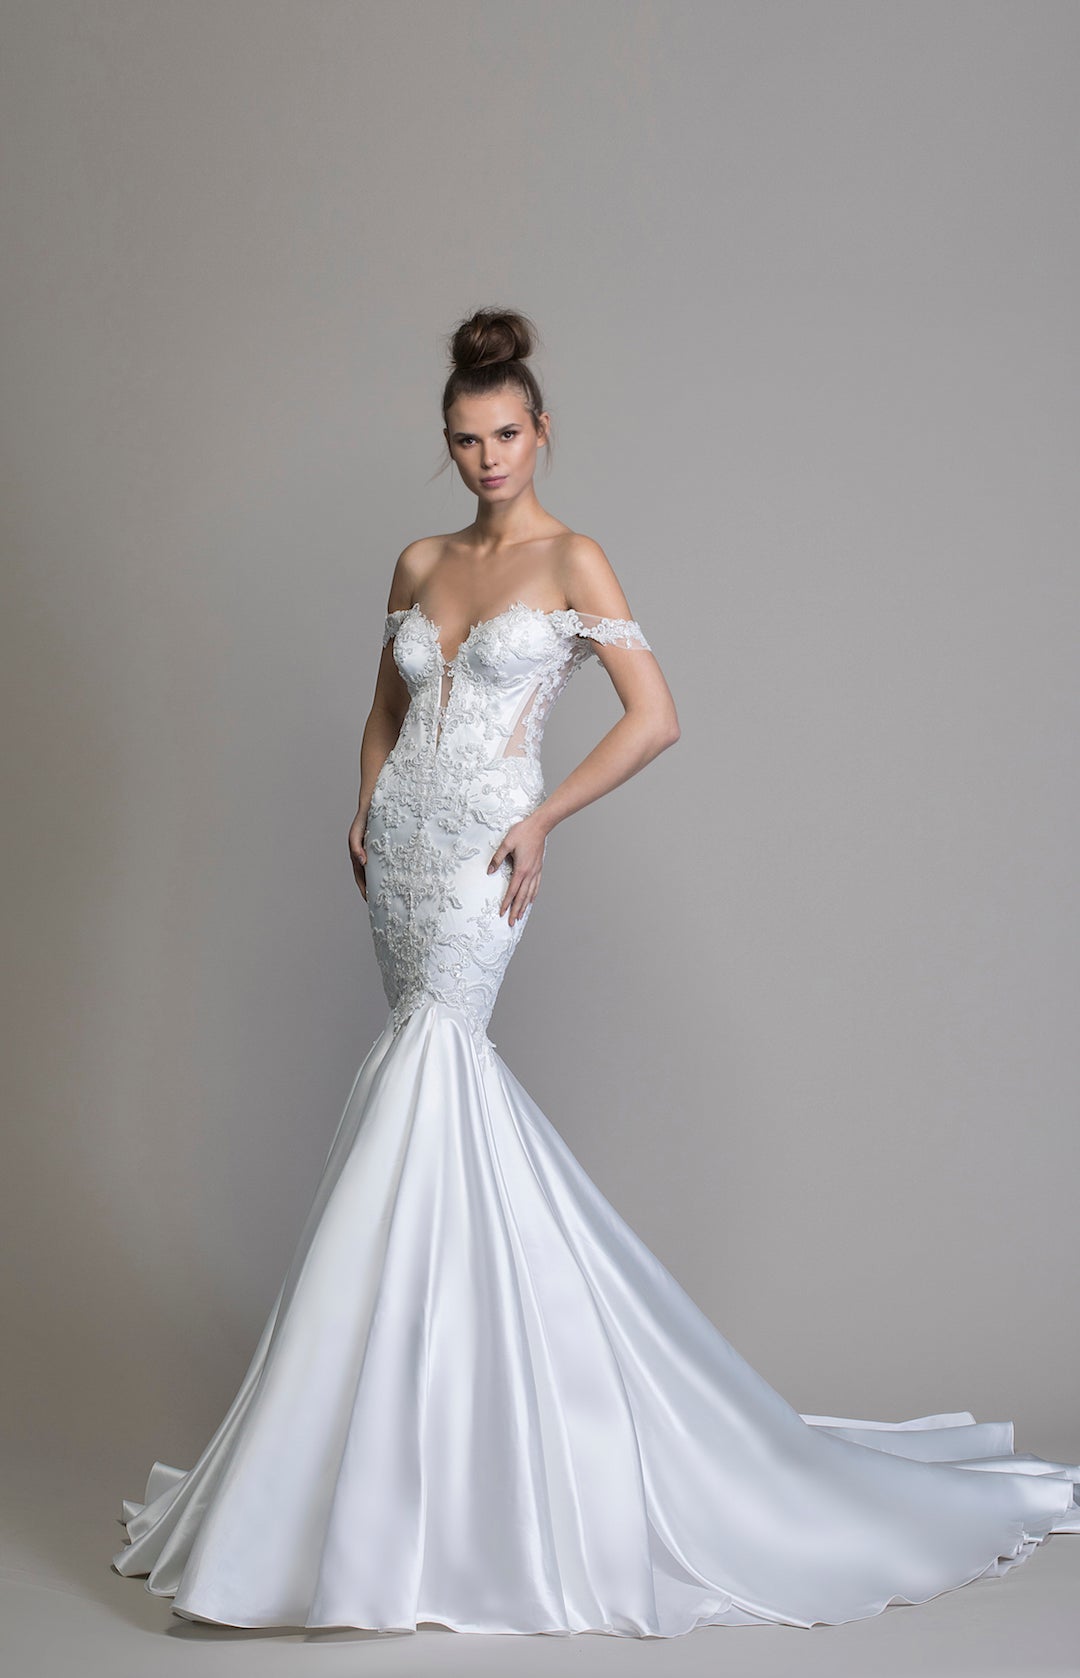 Pnina Tornai's new LOVE 2020 Collection is out! This is style 14779